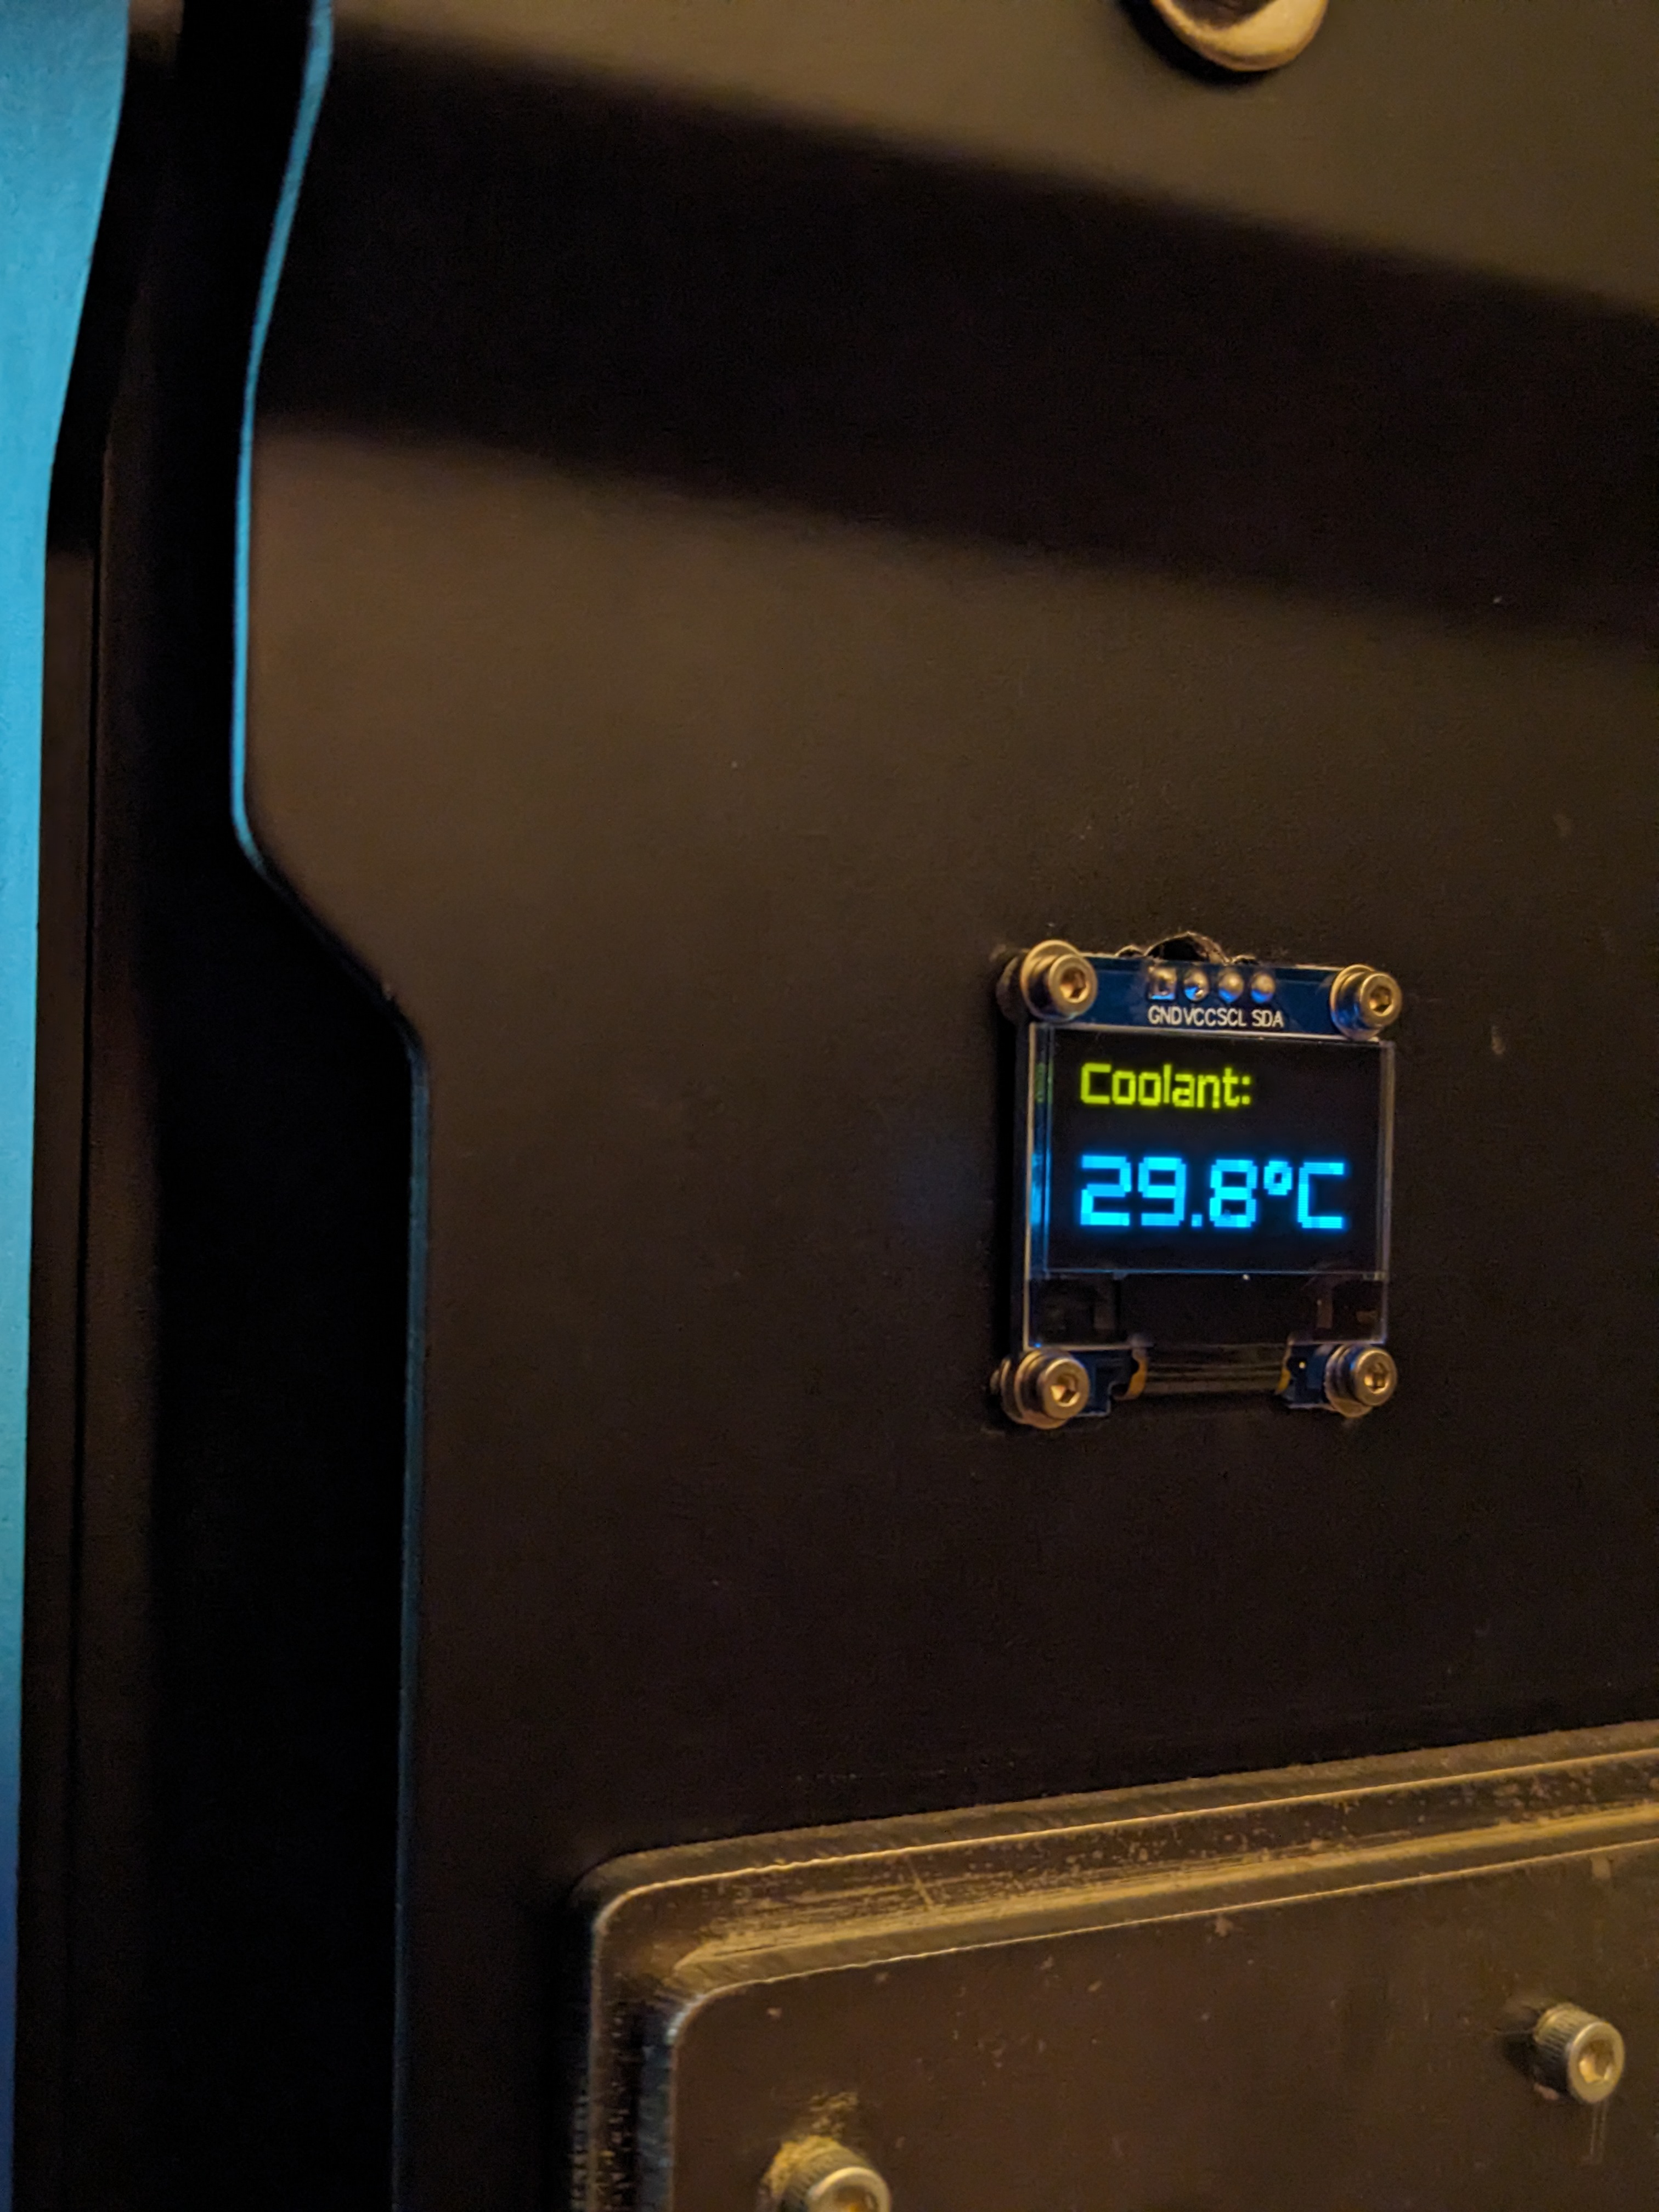 OLED display for the coolant temperature